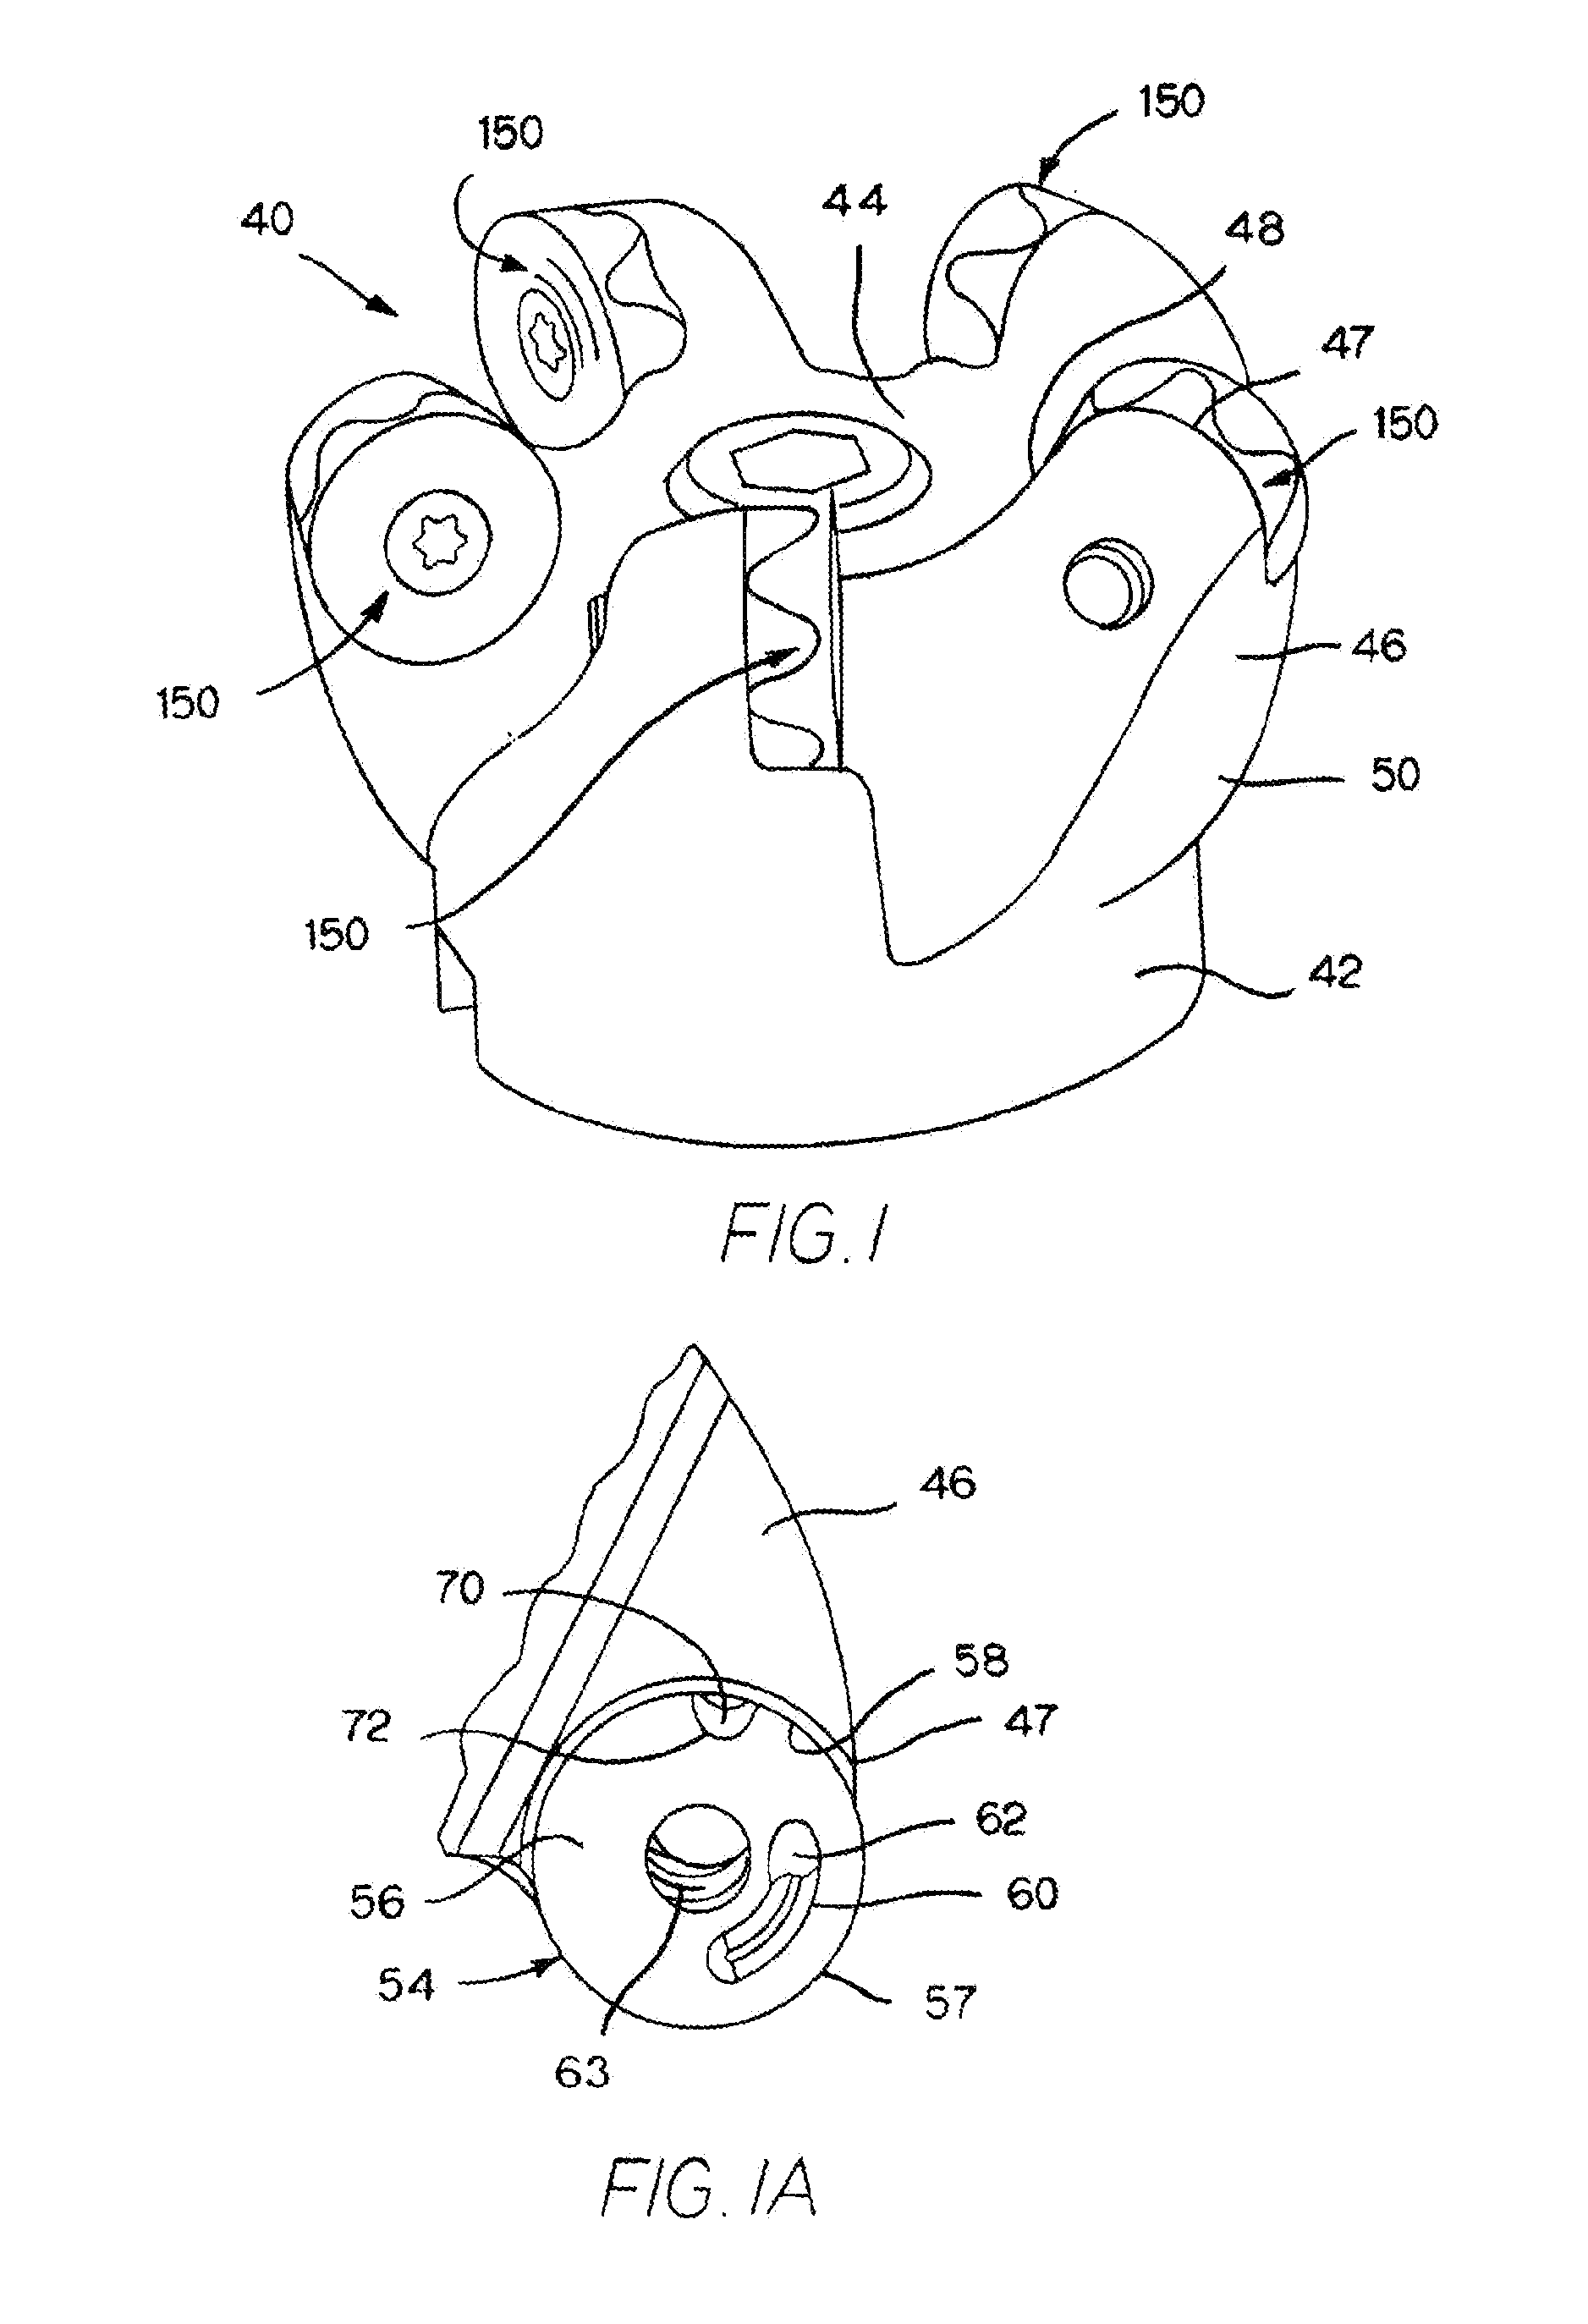 Cutting insert with internal coolant delivery and surface feature for enhanced coolant flow